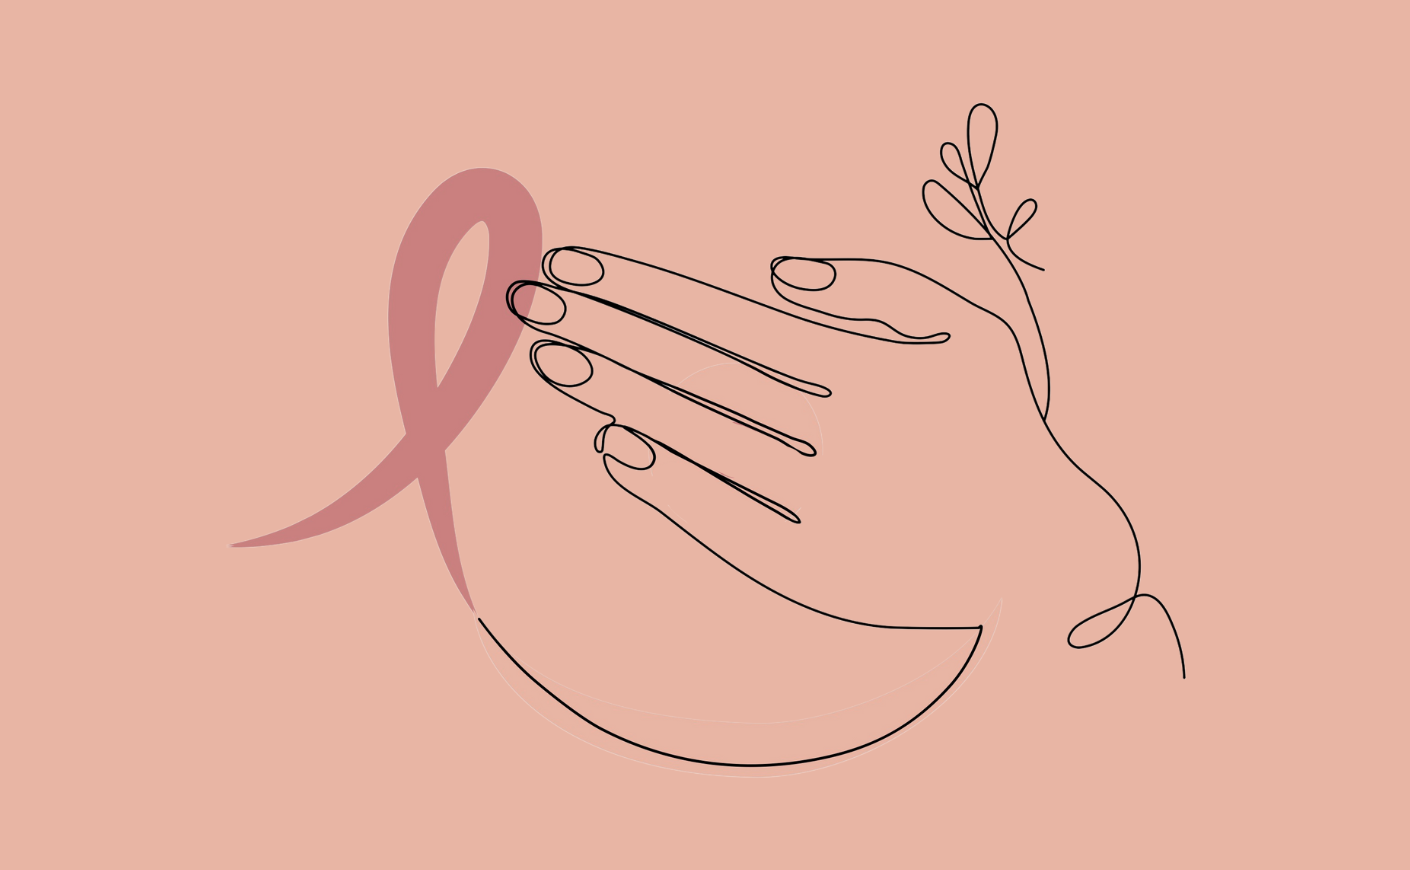 an illustration of a woman covering her breast